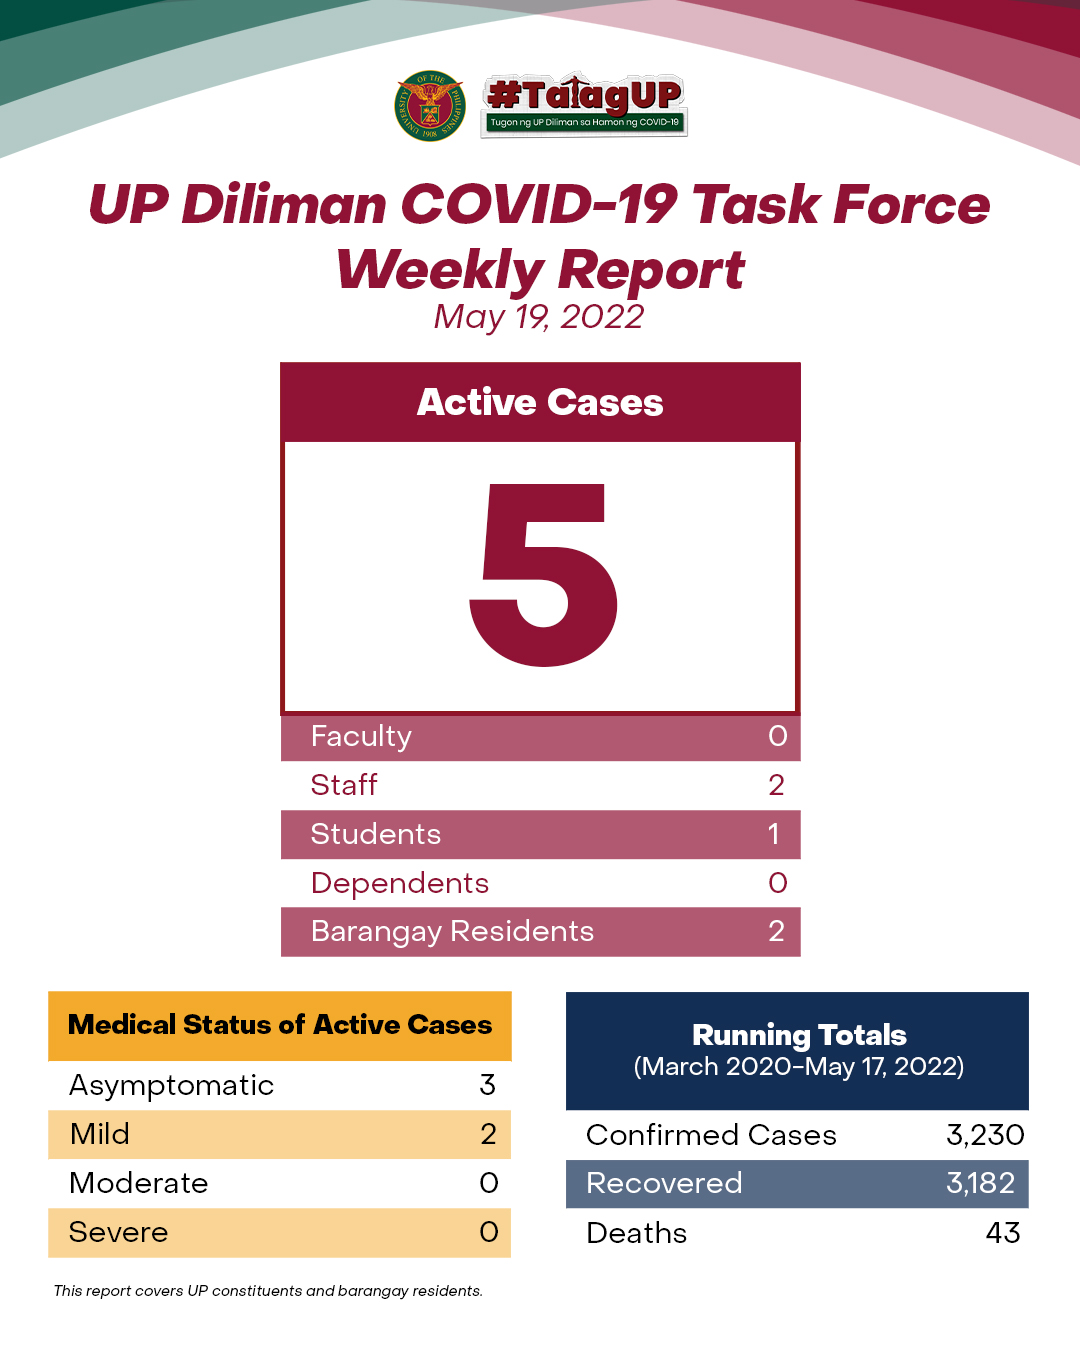 UP Diliman COVID-19 Task Force Weekly Report (May 19, 2022)